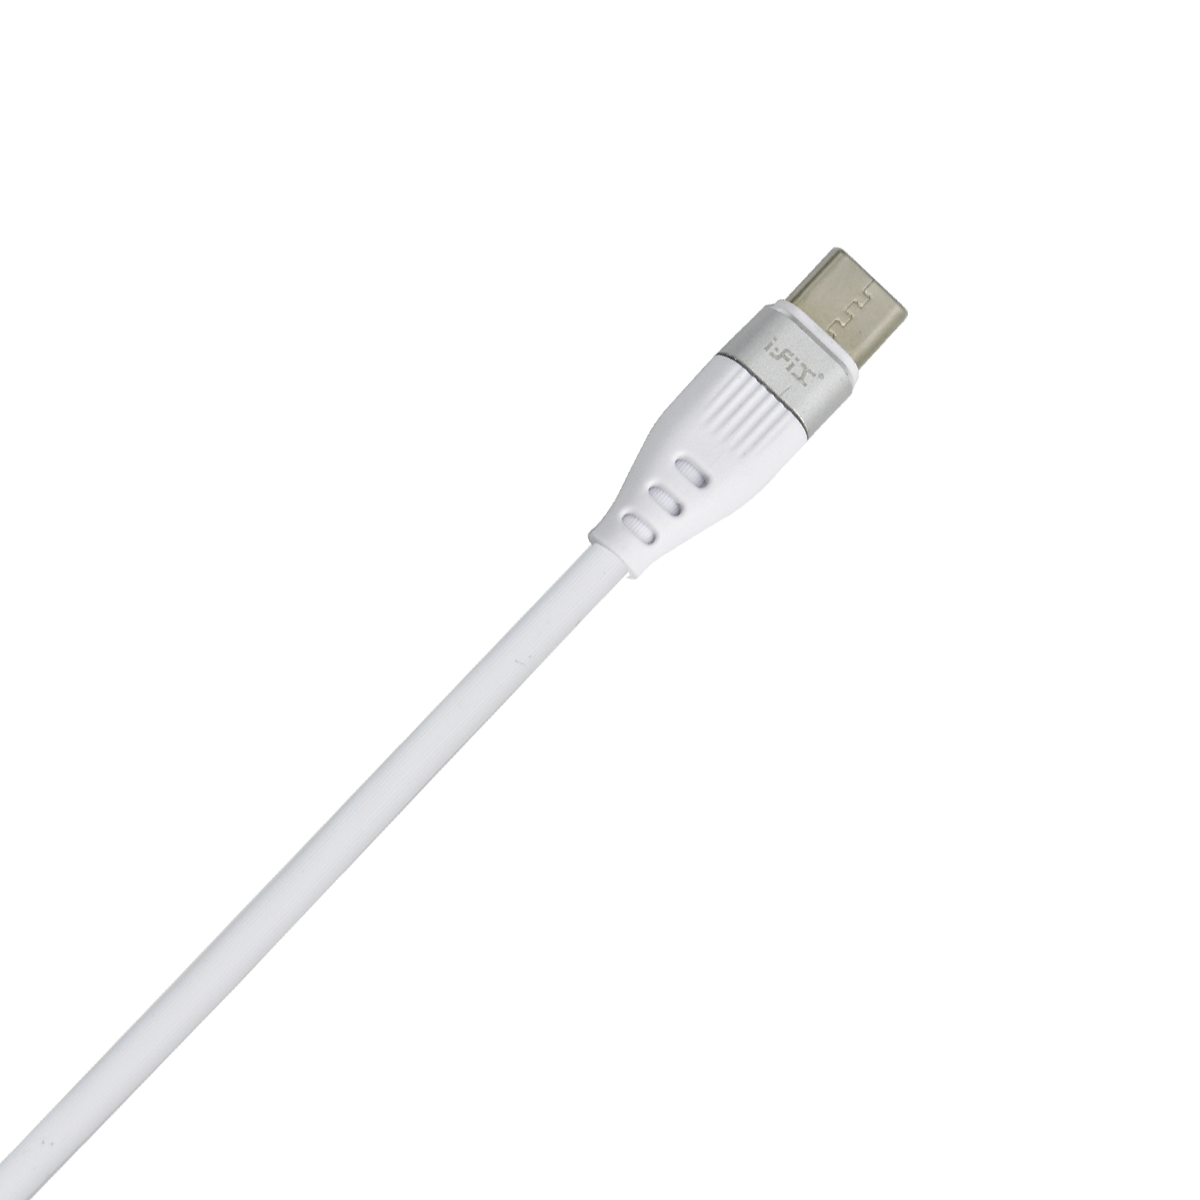 IF-01 Type-C 3.4A Fast Charging USB Data Cable(White)